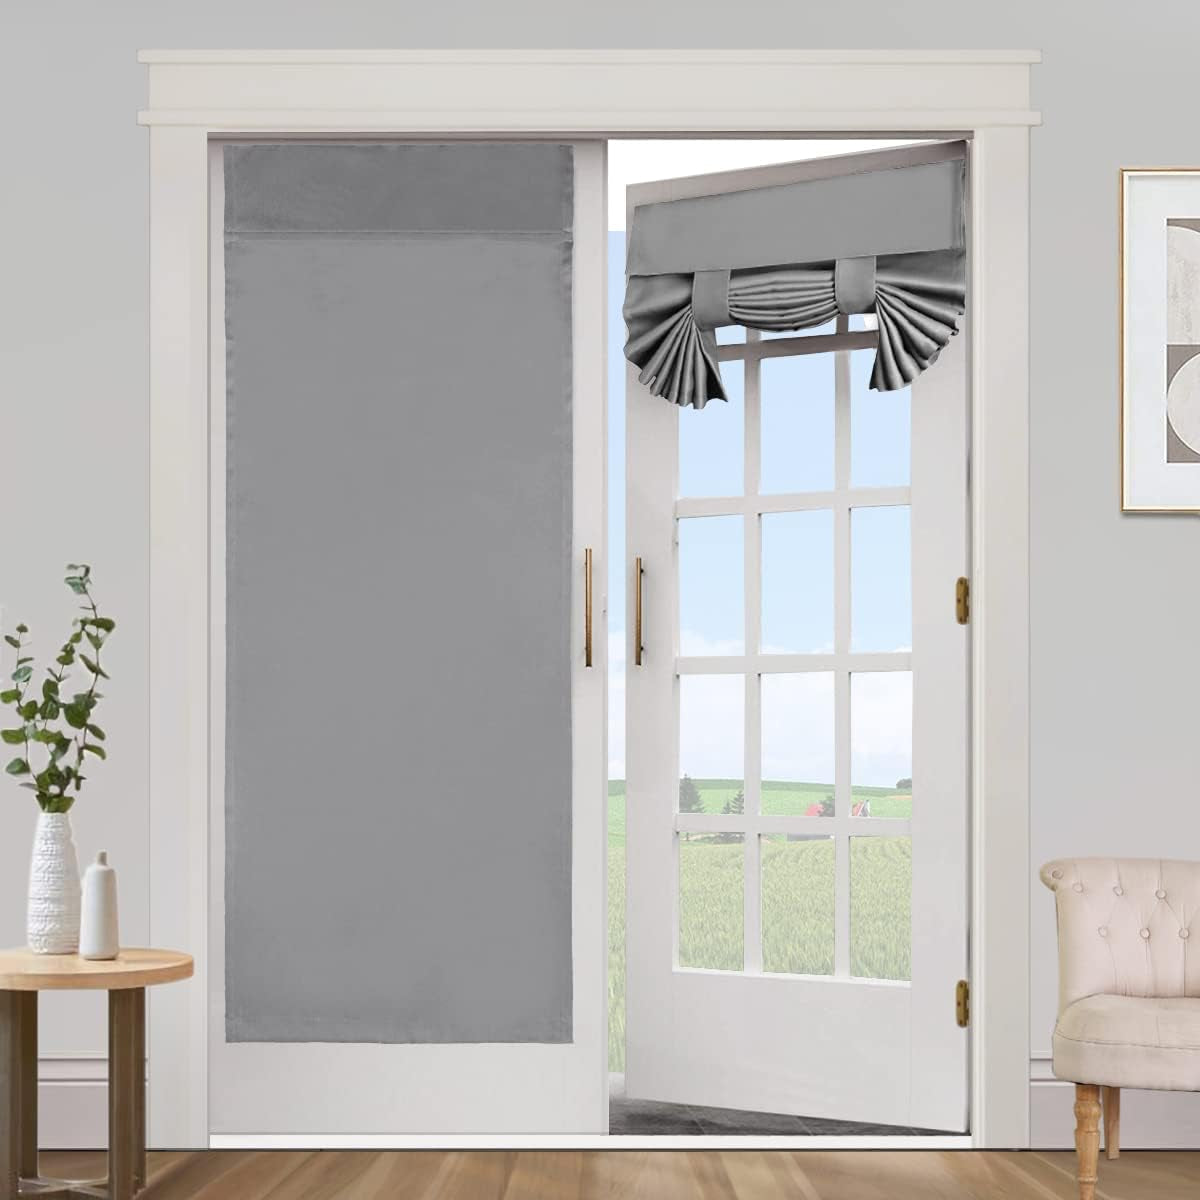 Blackout Curtains for French Doors - Thermal Insulated Tricia Door Window Curtain for Patio Door, Self Stick Tie up Shade Energy Efficient Double Door Blind, 26 X 68 Inches, 1 Panel, Sage  L.VICTEX Grey 2 